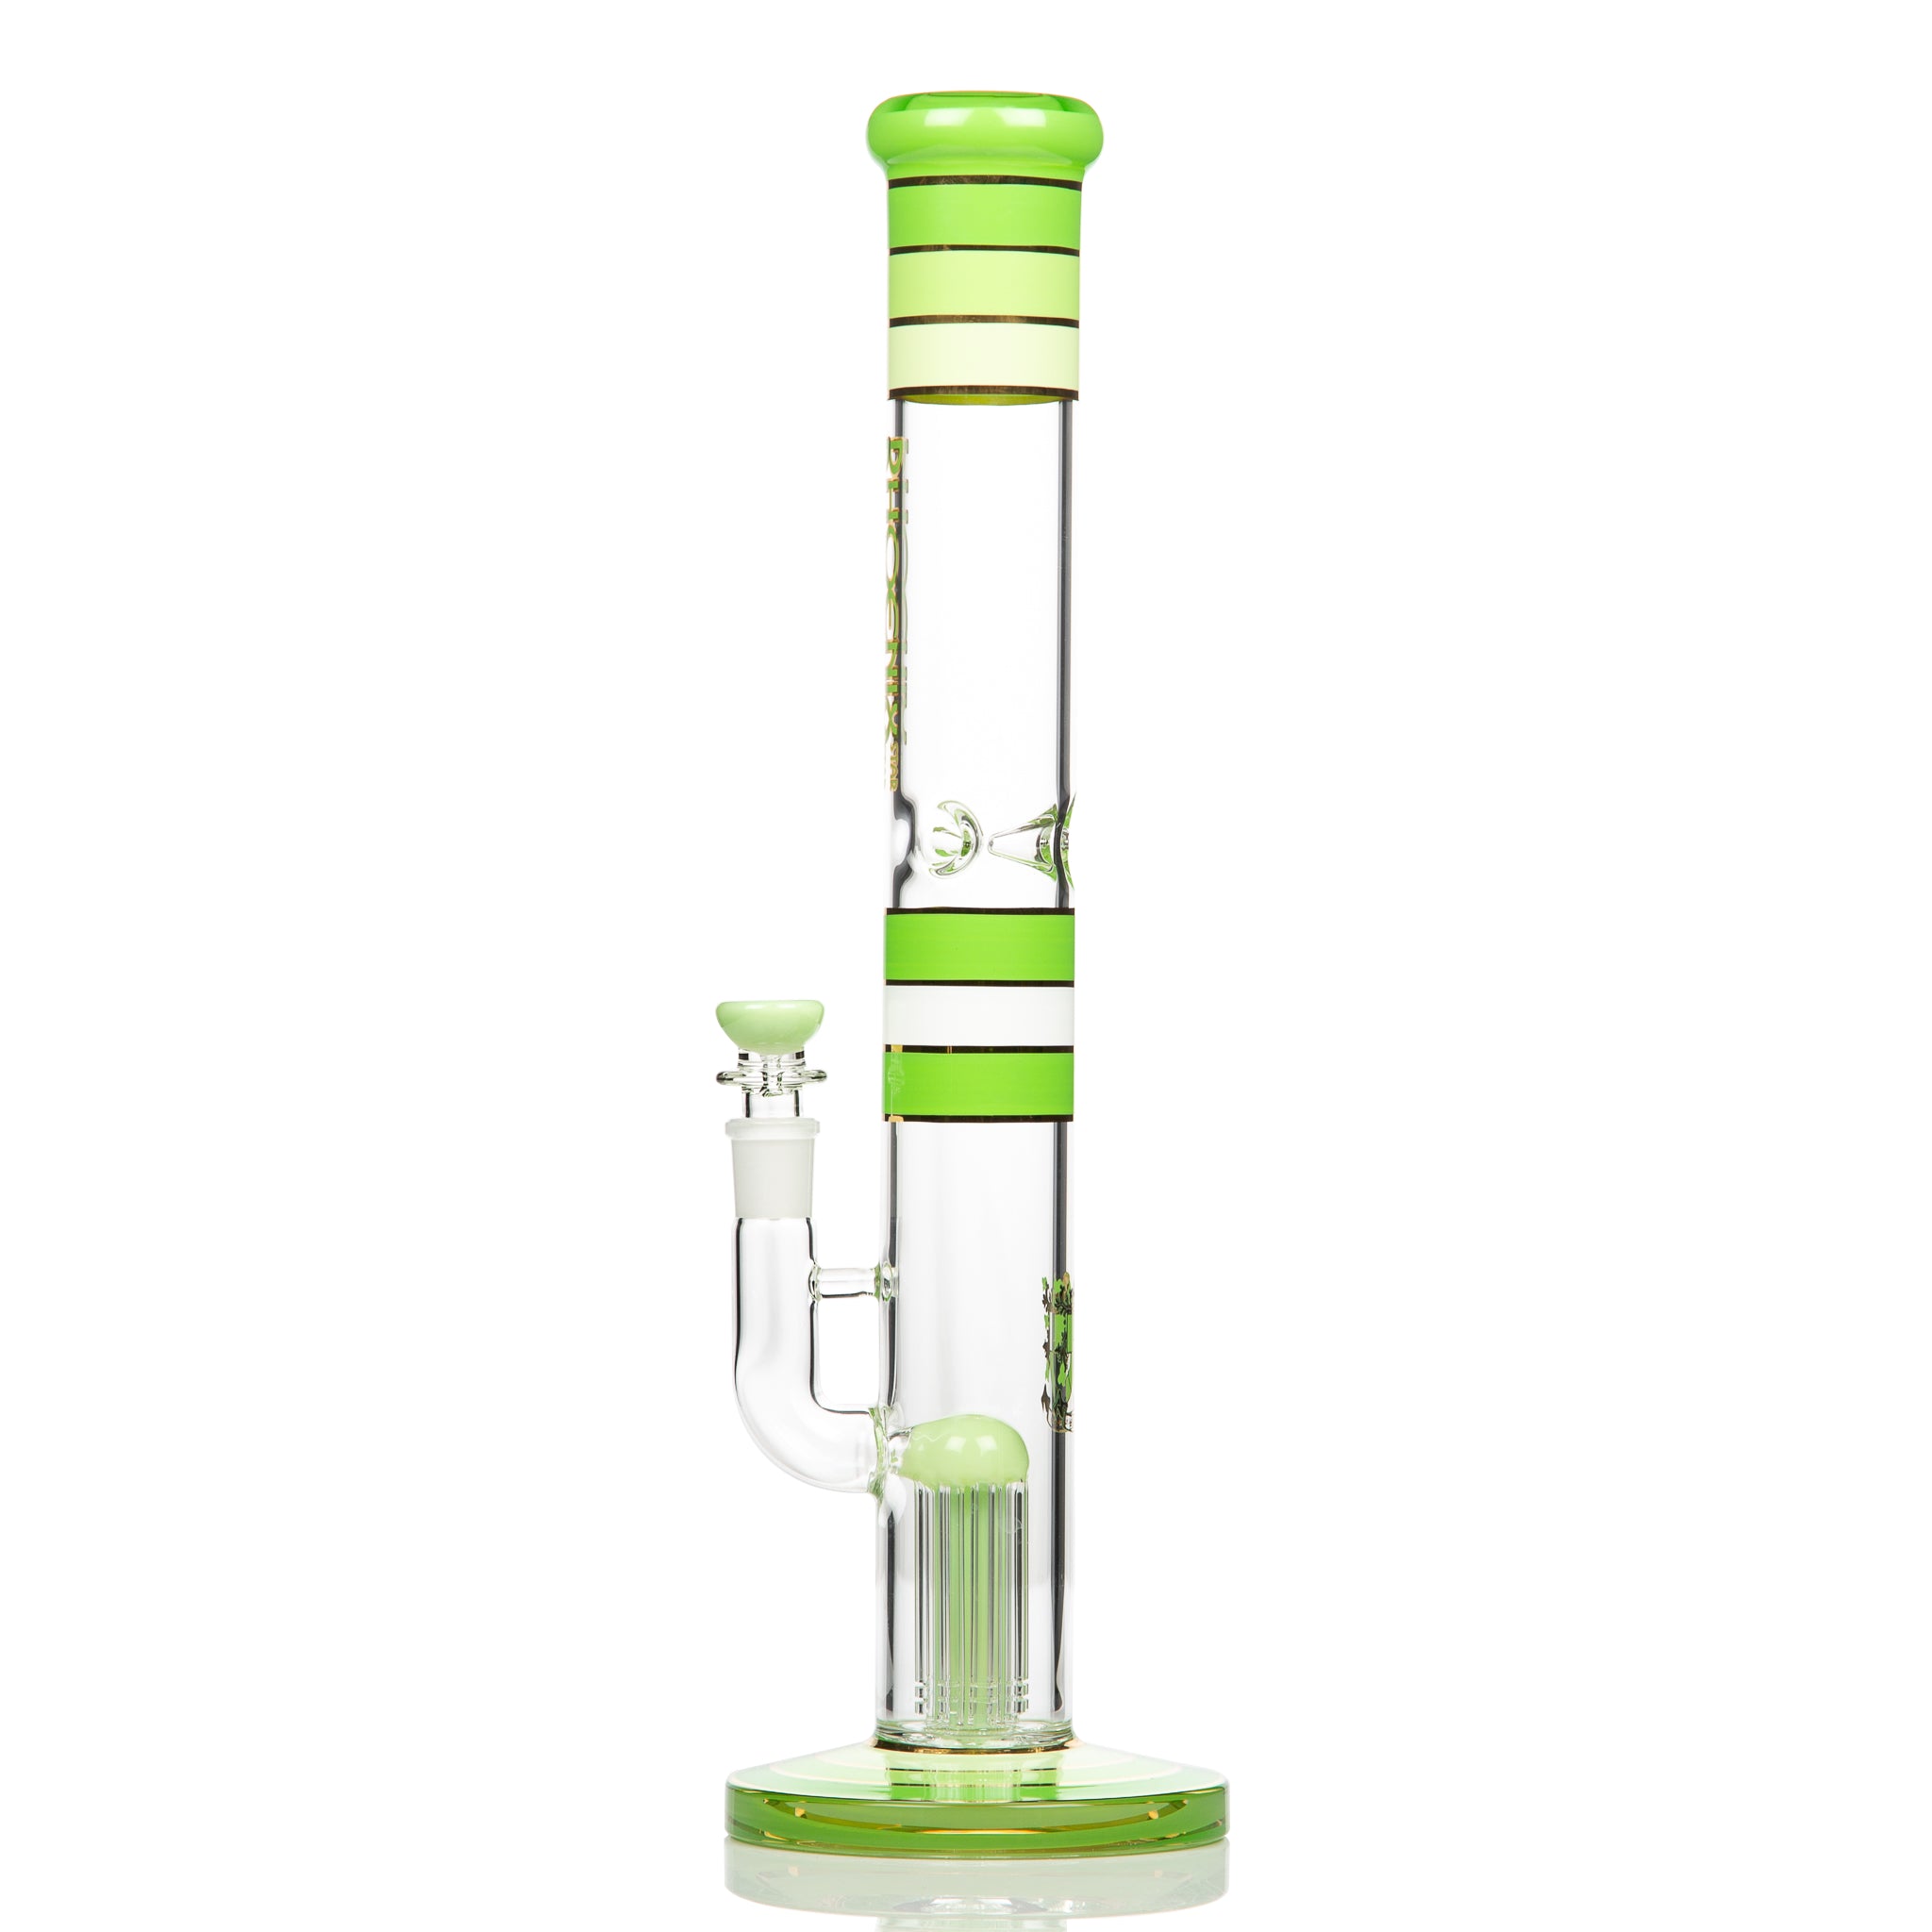  Phoenix 8 arm tree tube straight bong with decorative coloured sections.